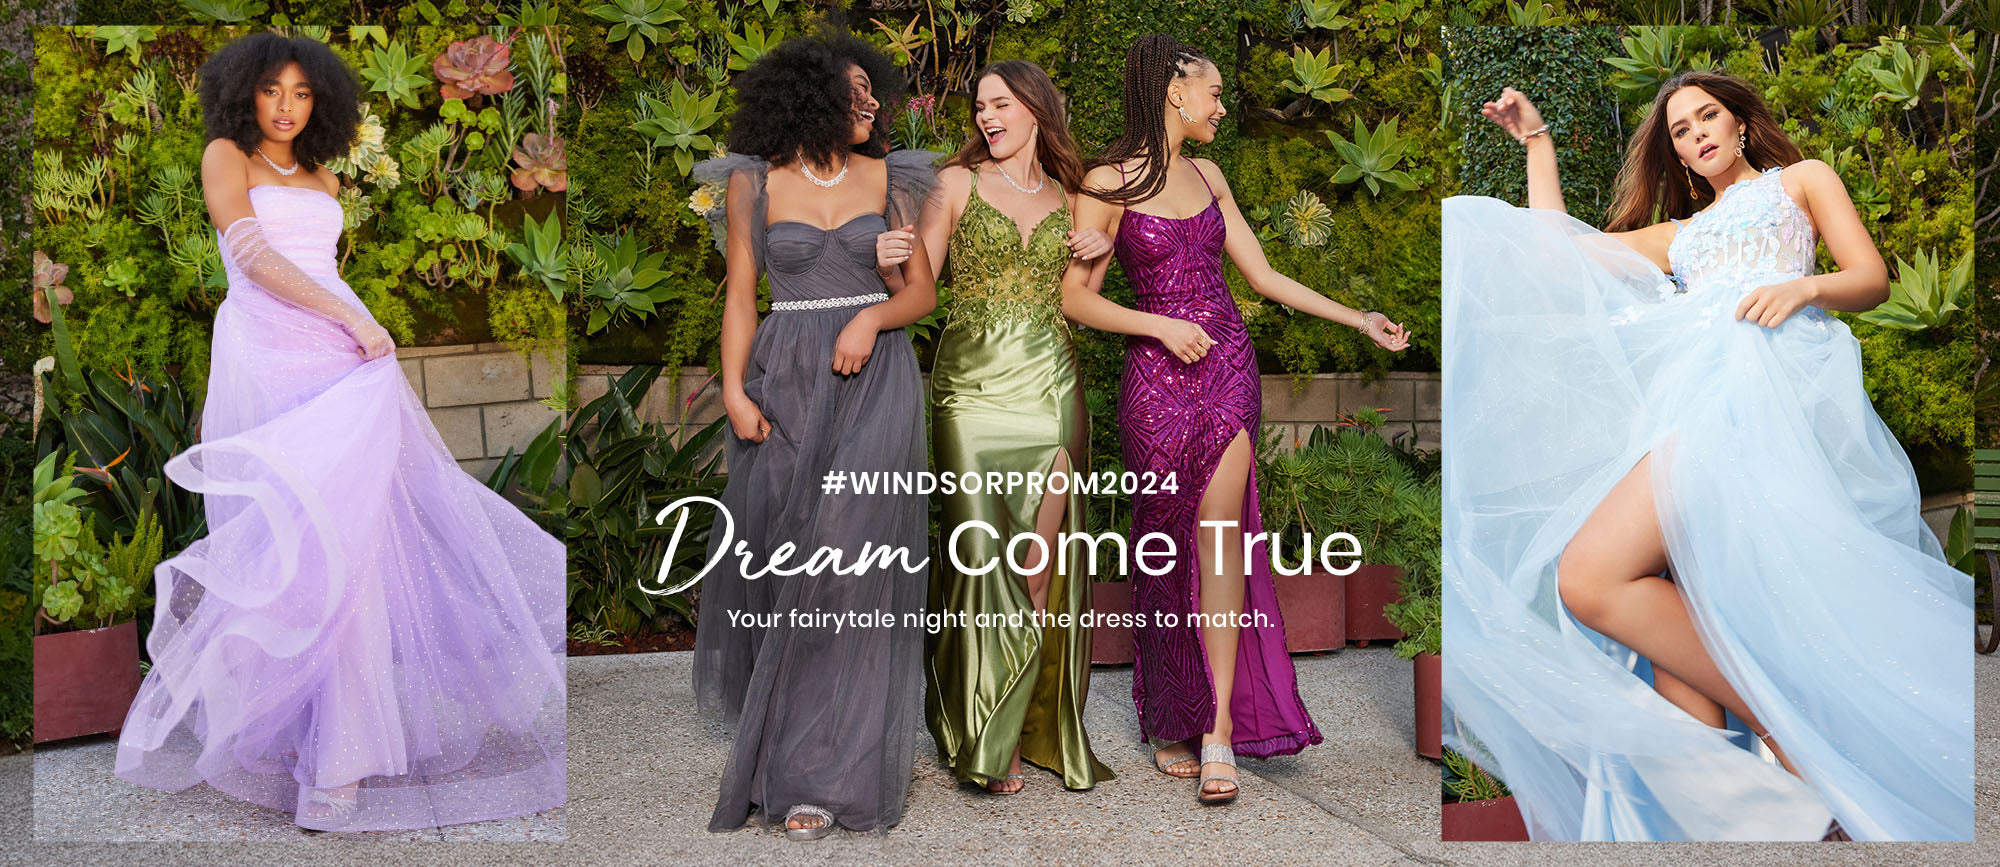 Shop Prom Dresses in new colors including purple, blue or green prom dresses, accents on sequin, satin, lace or tulle, formal dresses with gloves, ball gowns, & more to find the perfect prom dress to match your fairytale night!